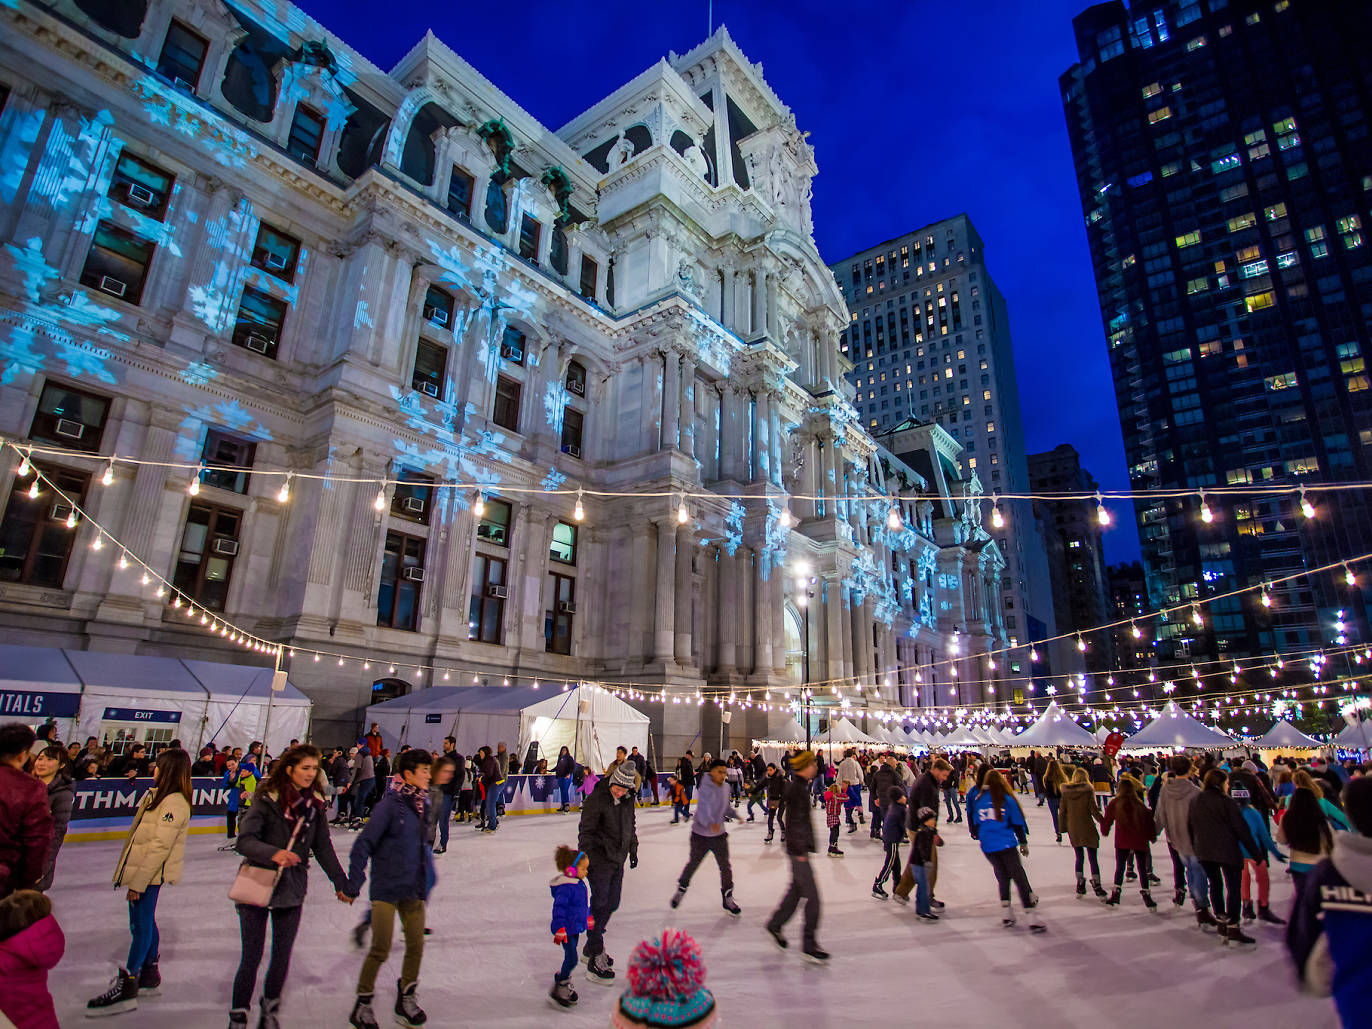 21 Best Christmas Events and Attractions in Philadelphia